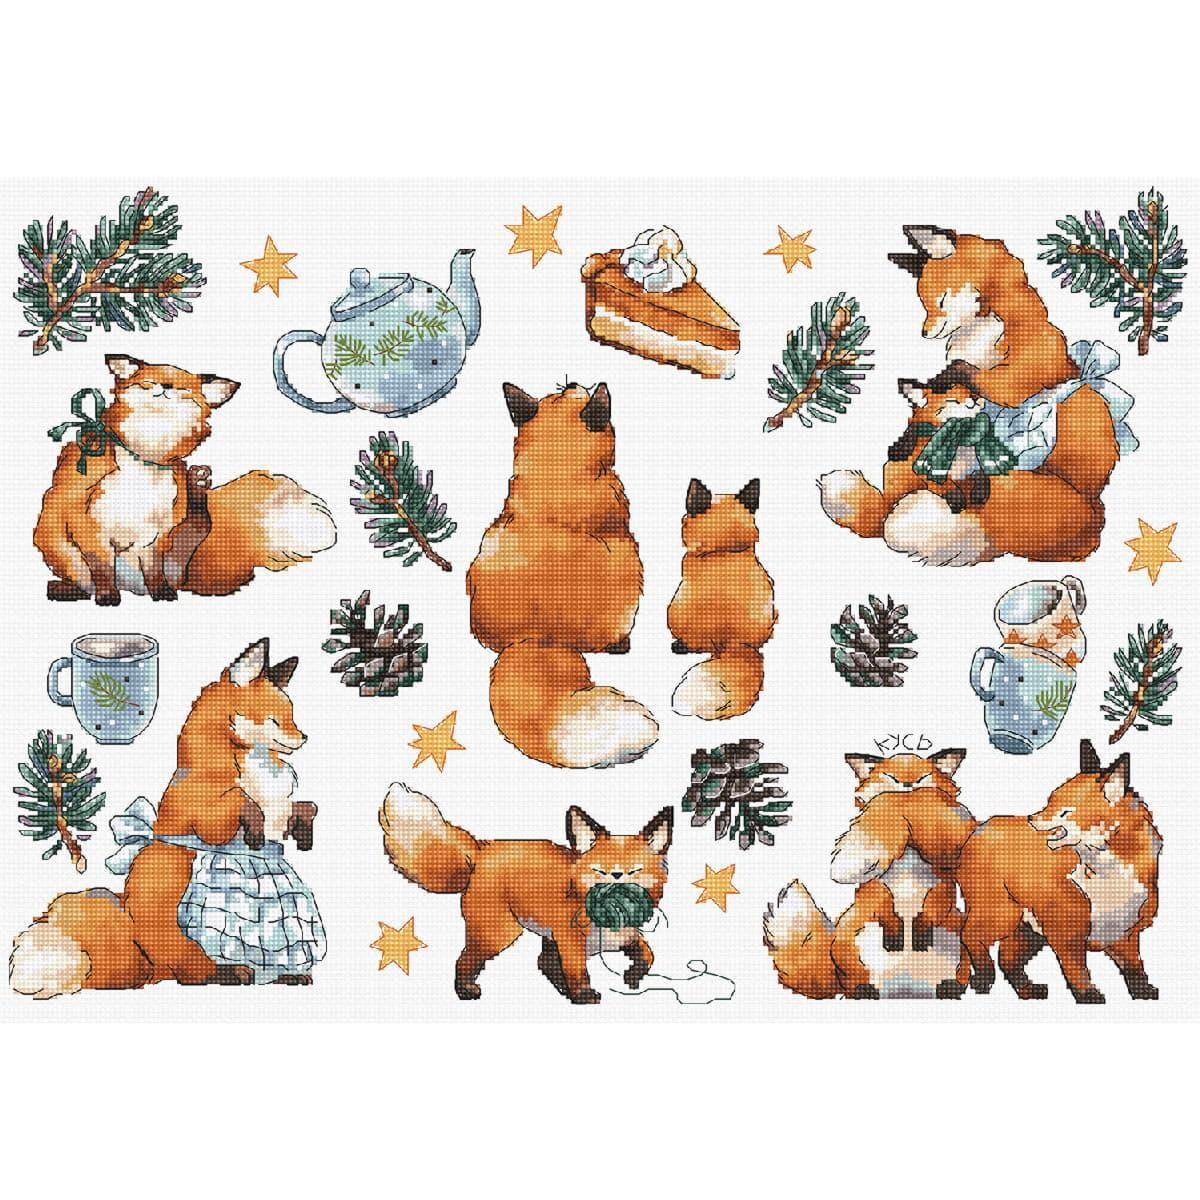 Illustrated pattern with various foxes in different poses...